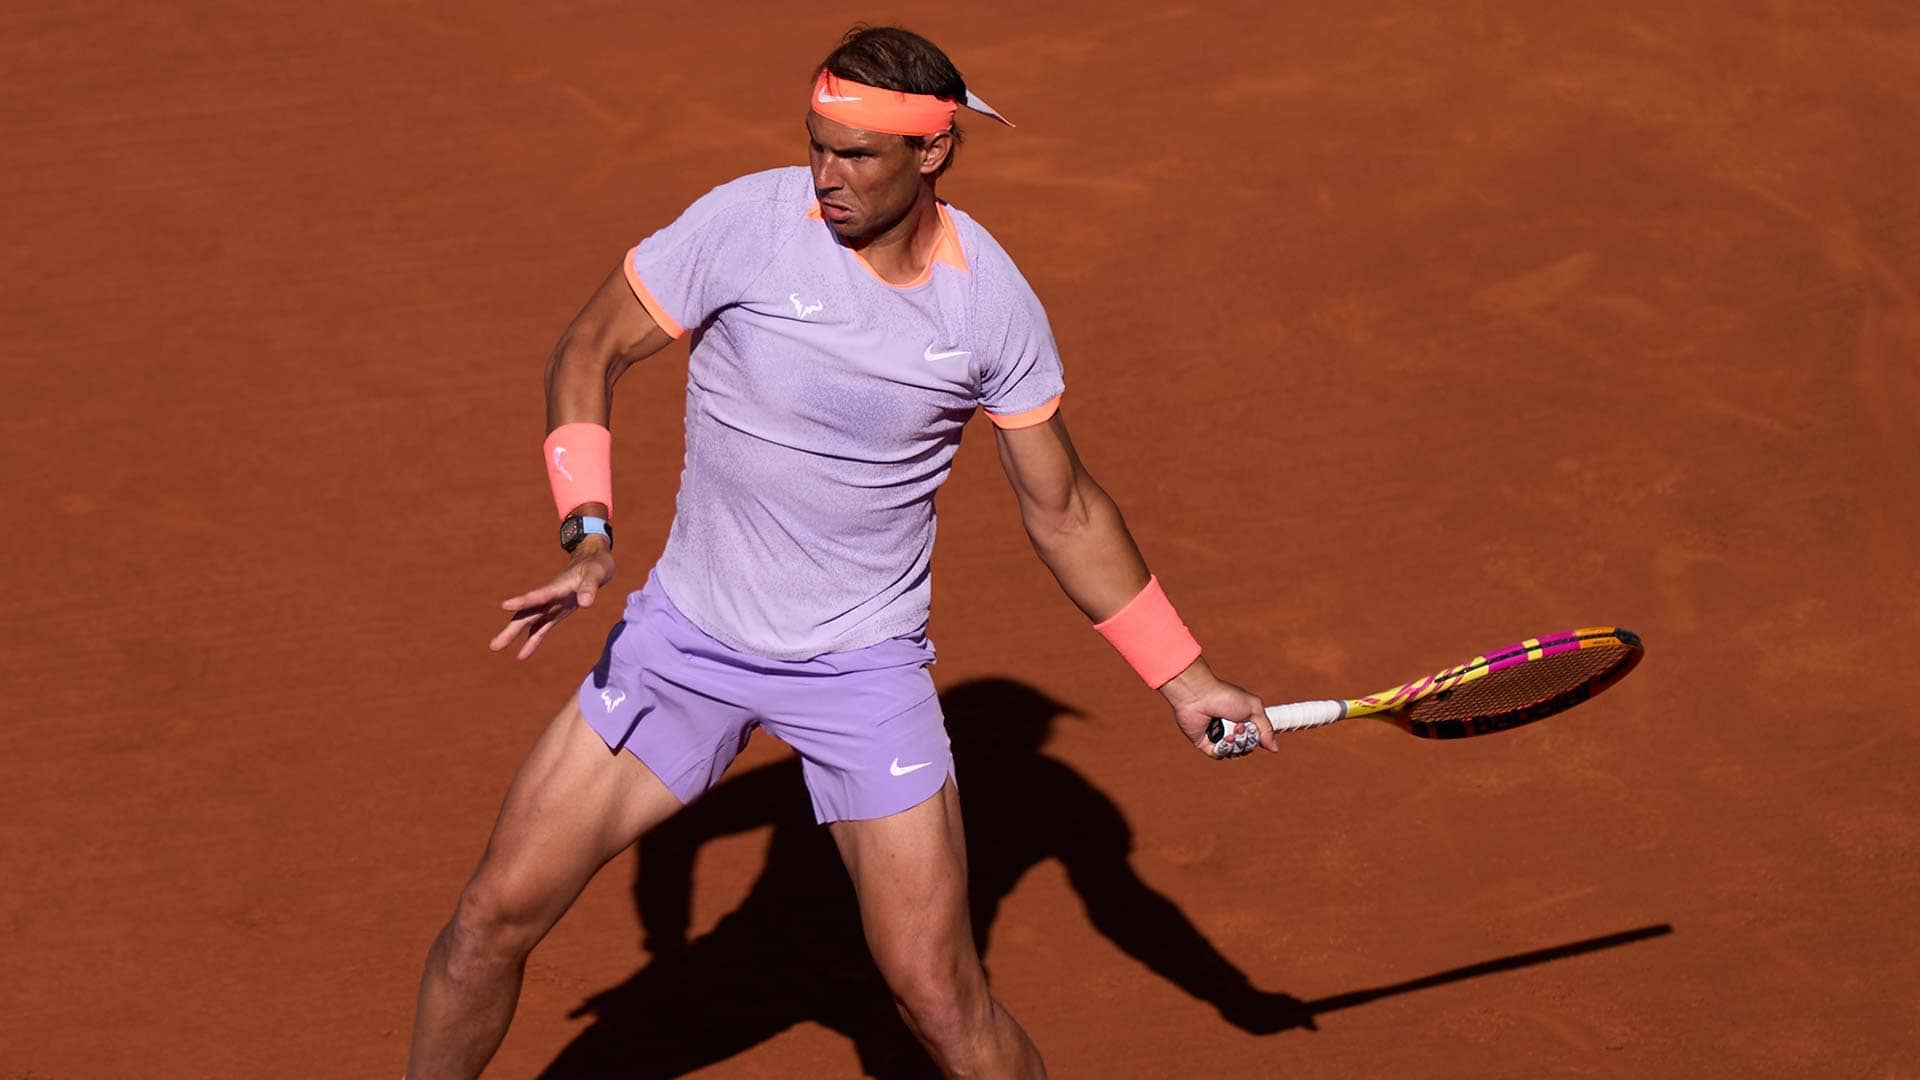 Rafael Nadal eased to victory in his maiden Lexus ATP Head2Head clash with Flavio Cobolli on Tuesday in Barcelona.